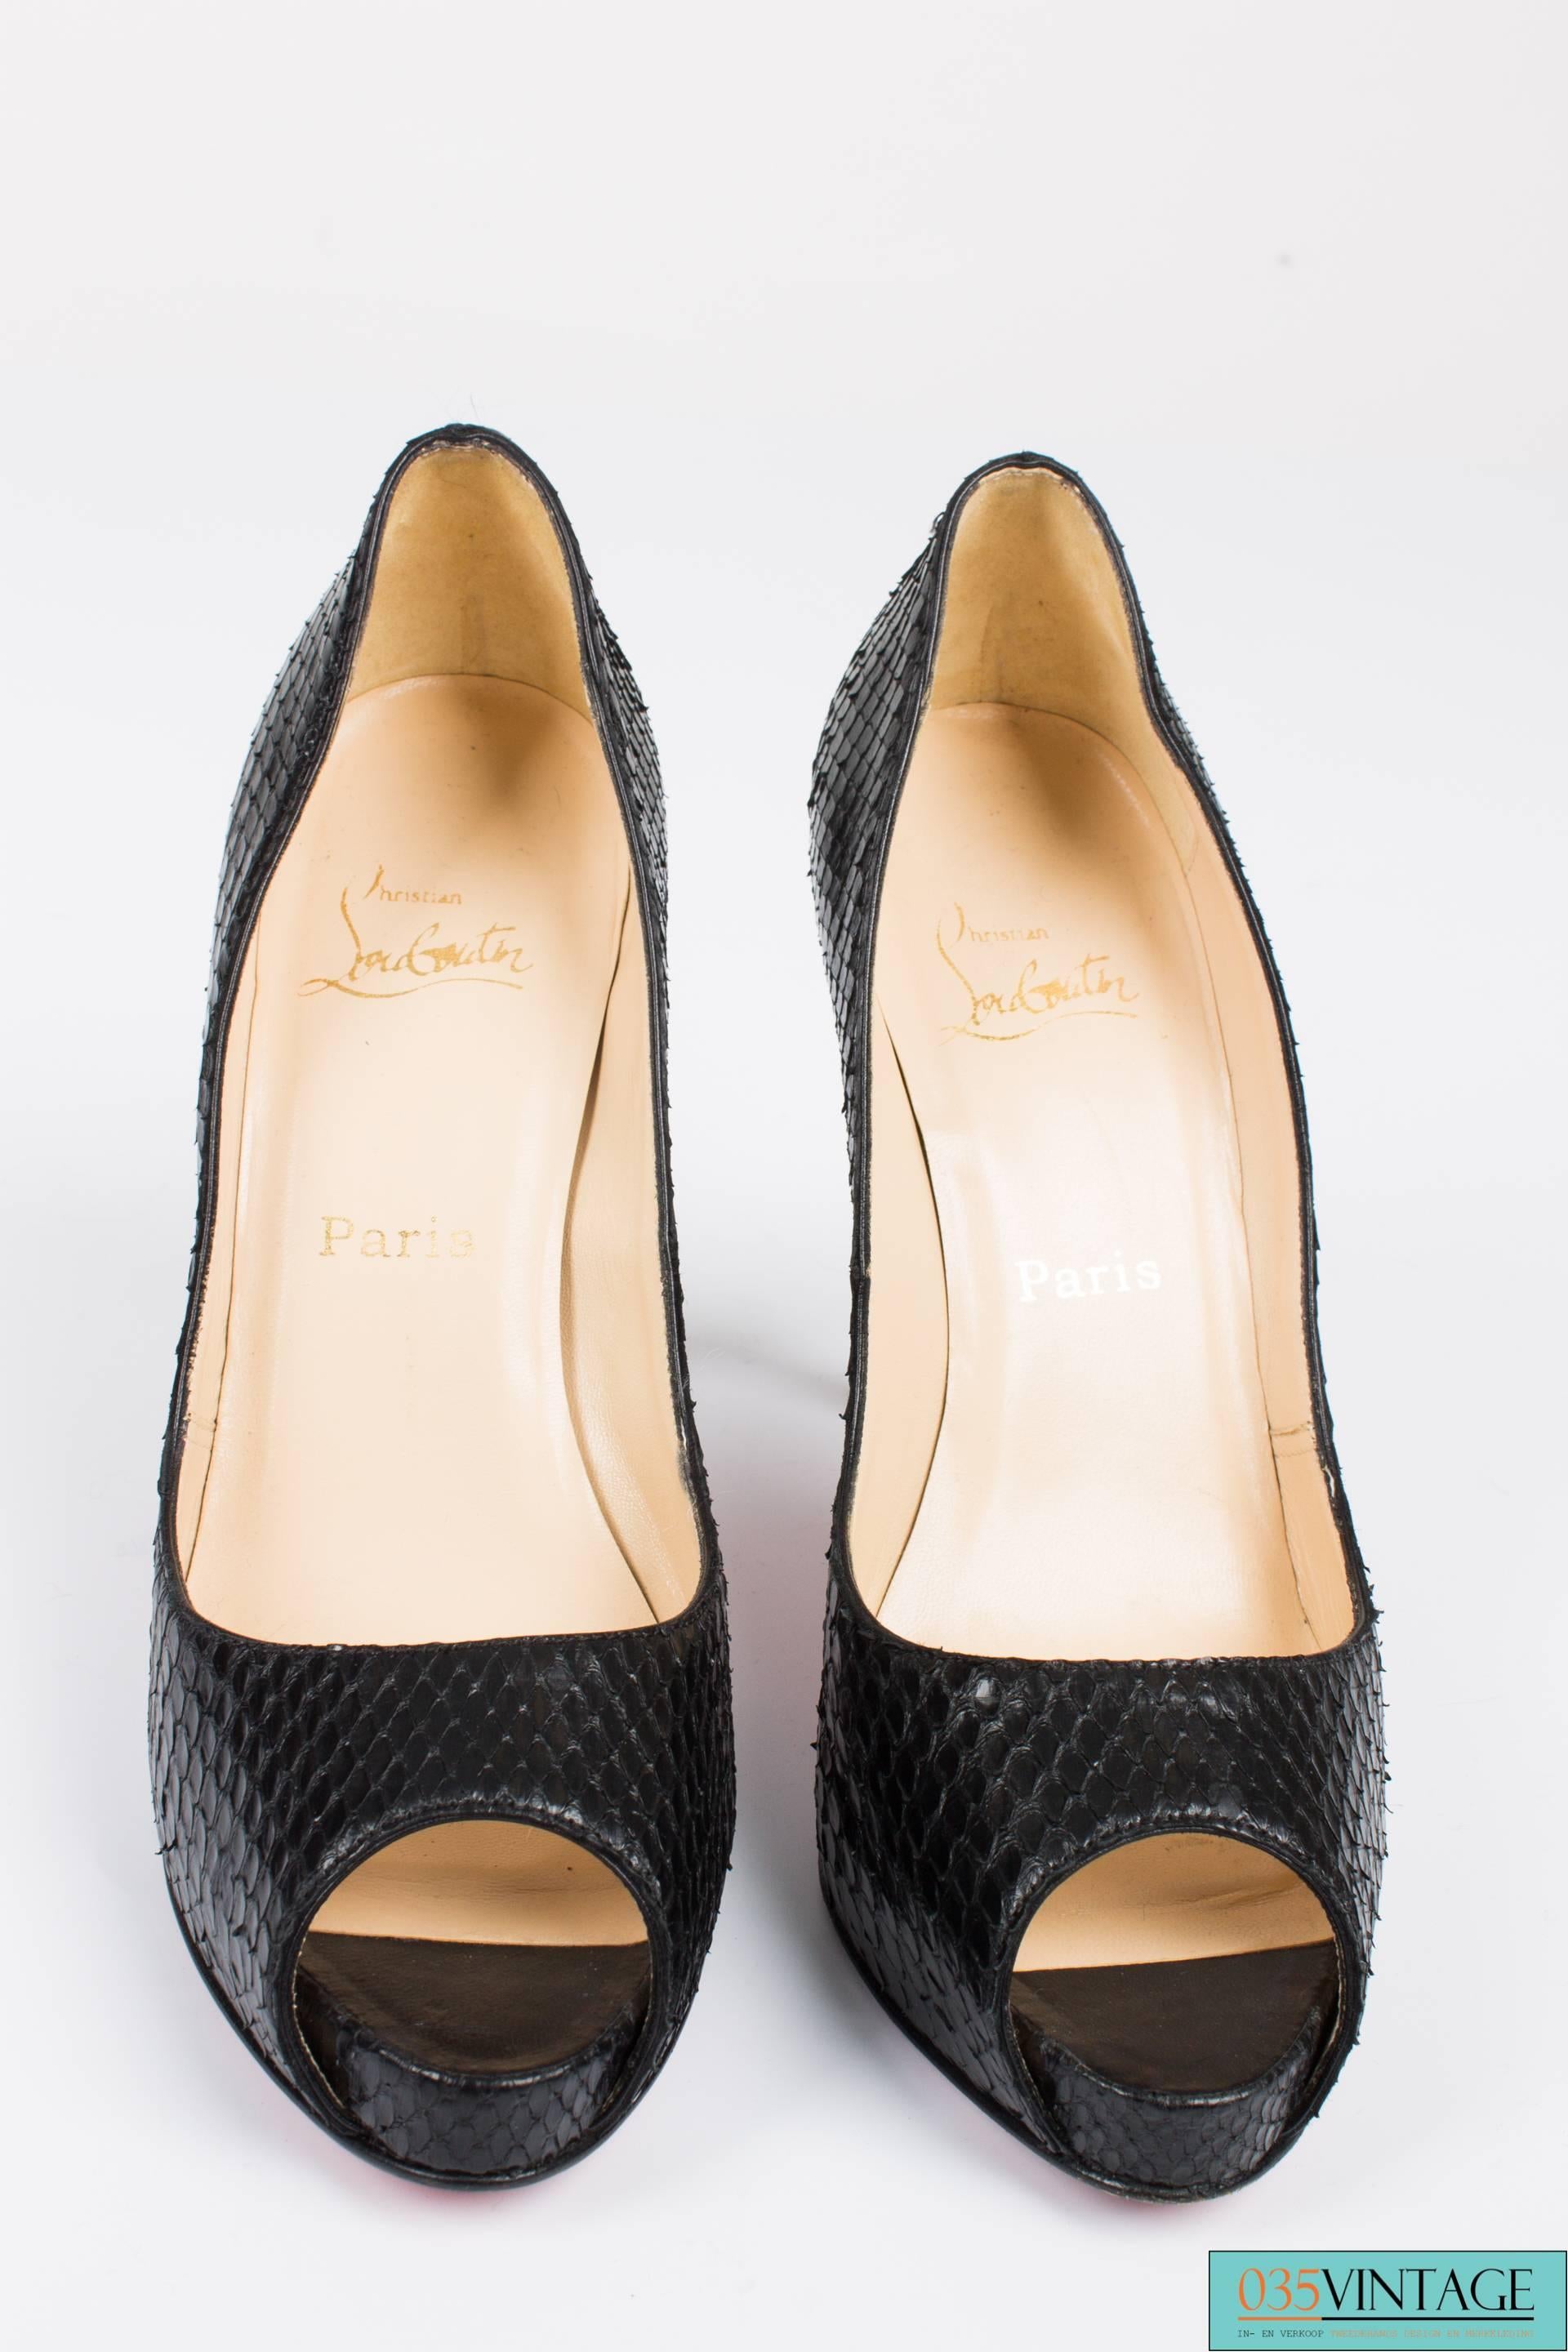 Originals! Beautiful Christian Louboutin peep-toe pumps made of black python leather.

Stirdy and sky high with a hidden platform. This platform measures 2 centimeters and the heel 12 centimeters. As good as new, maybe walked on once. The interior